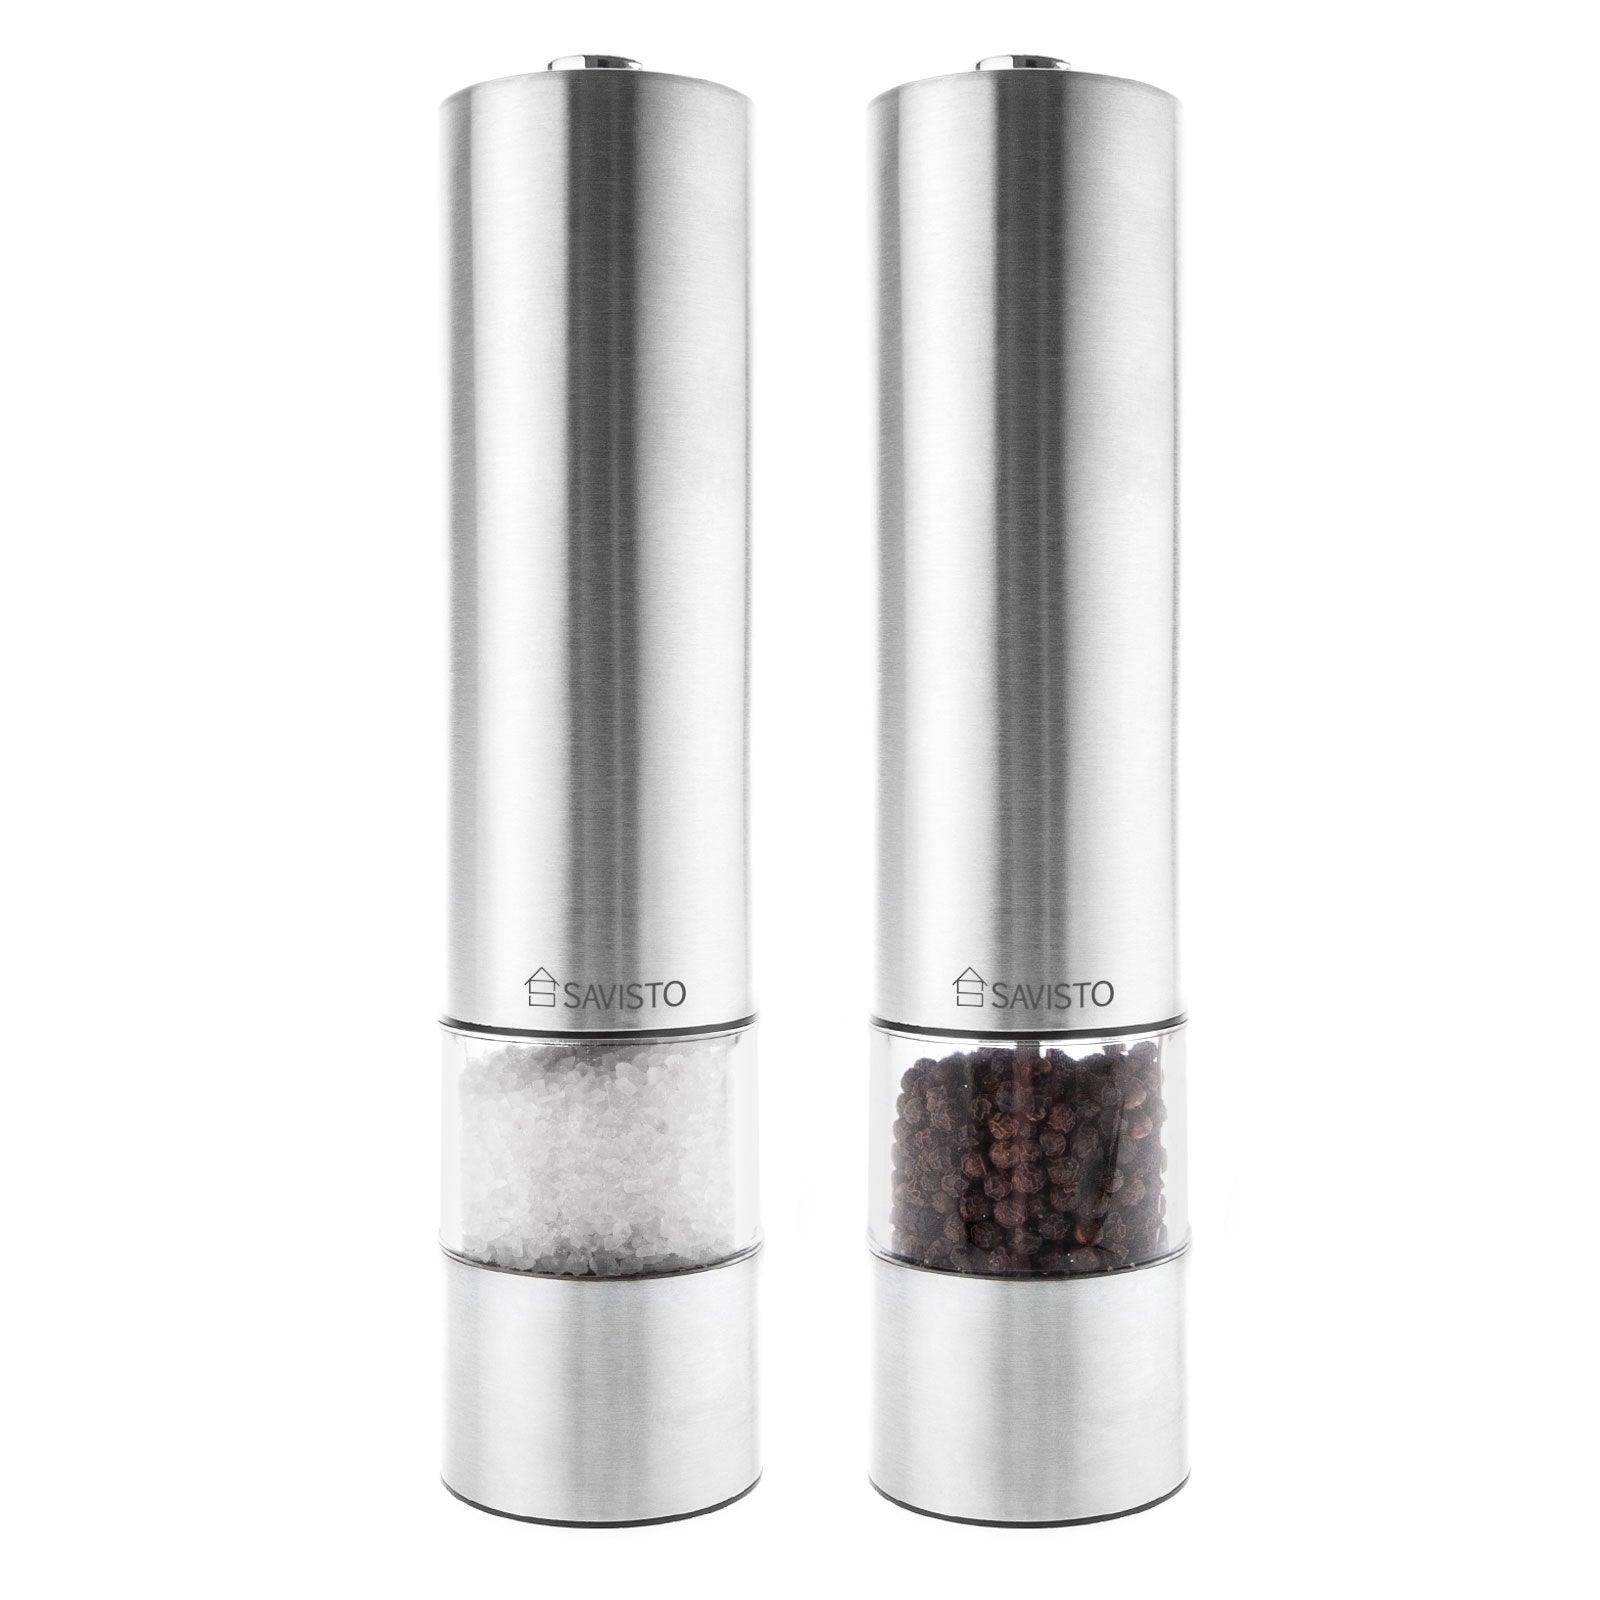 SpiceSurge Electric Salt and Pepper Grinder - One-Click Precision,  Stainless Steel Finish, Customizable Coarseness - Vysta Home